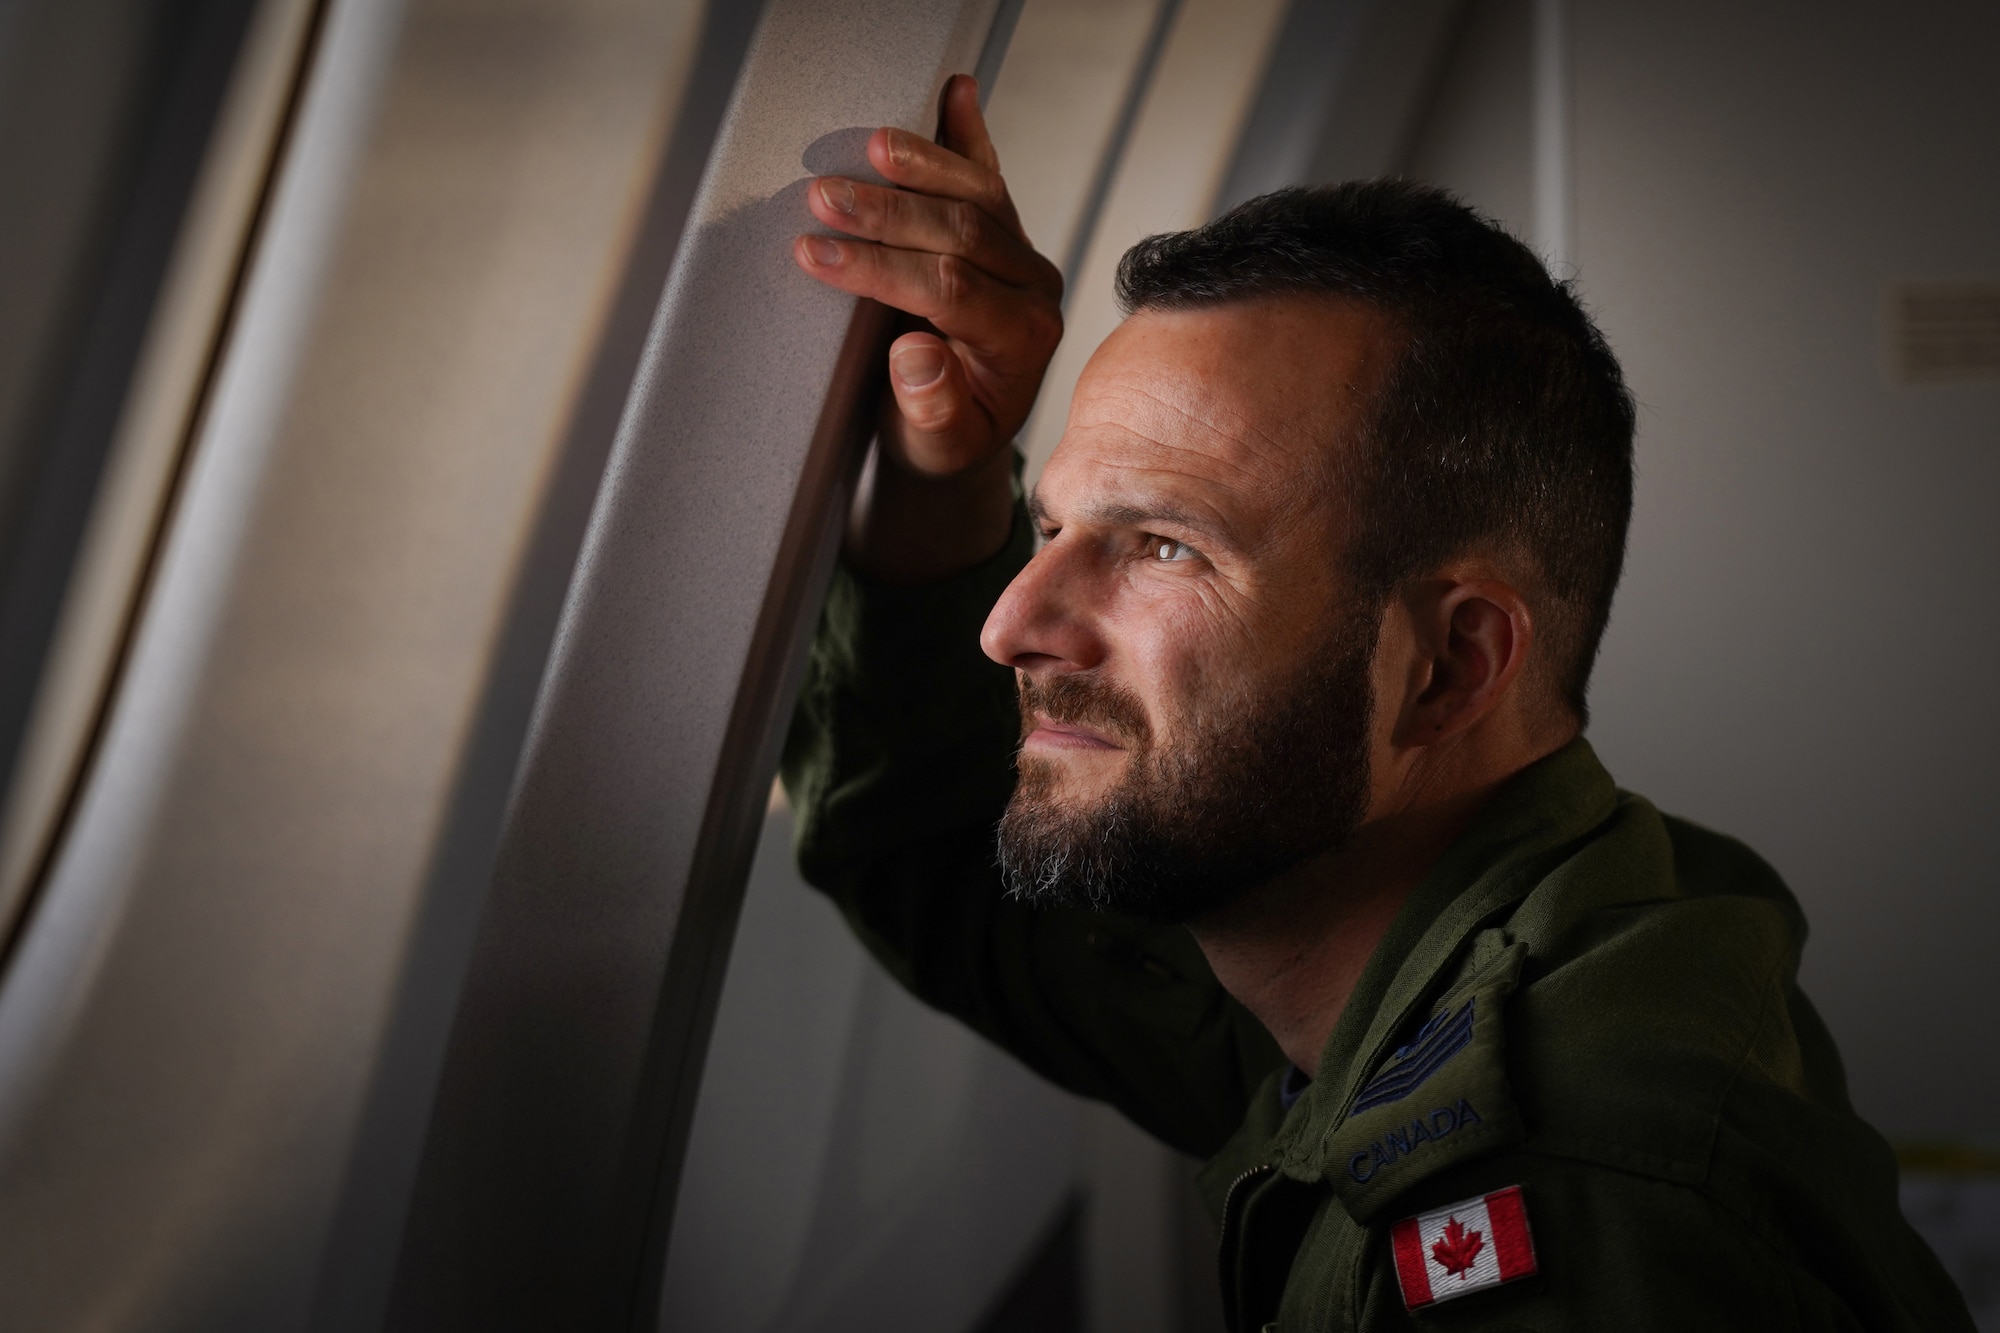 Royal Canadian Air Force Sgt. Oliver Beaudry, a loadmaster assigned to the 437th Transport Squadron based out of Canadian Forces Base Trenton, Canada, monitors refueling operations from a window of a CC-150 Polaris refueling tanker in training airspace over Alaska during the Red Flag-Alaska 19-3 exercise, Aug. 15, 2019. Red Flag-Alaska, a series of Pacific Air Forces commander-directed field training exercises for U.S. forces, provides joint offensive counter-air, interdiction, close air support, and large force employment training in a simulated combat environment.